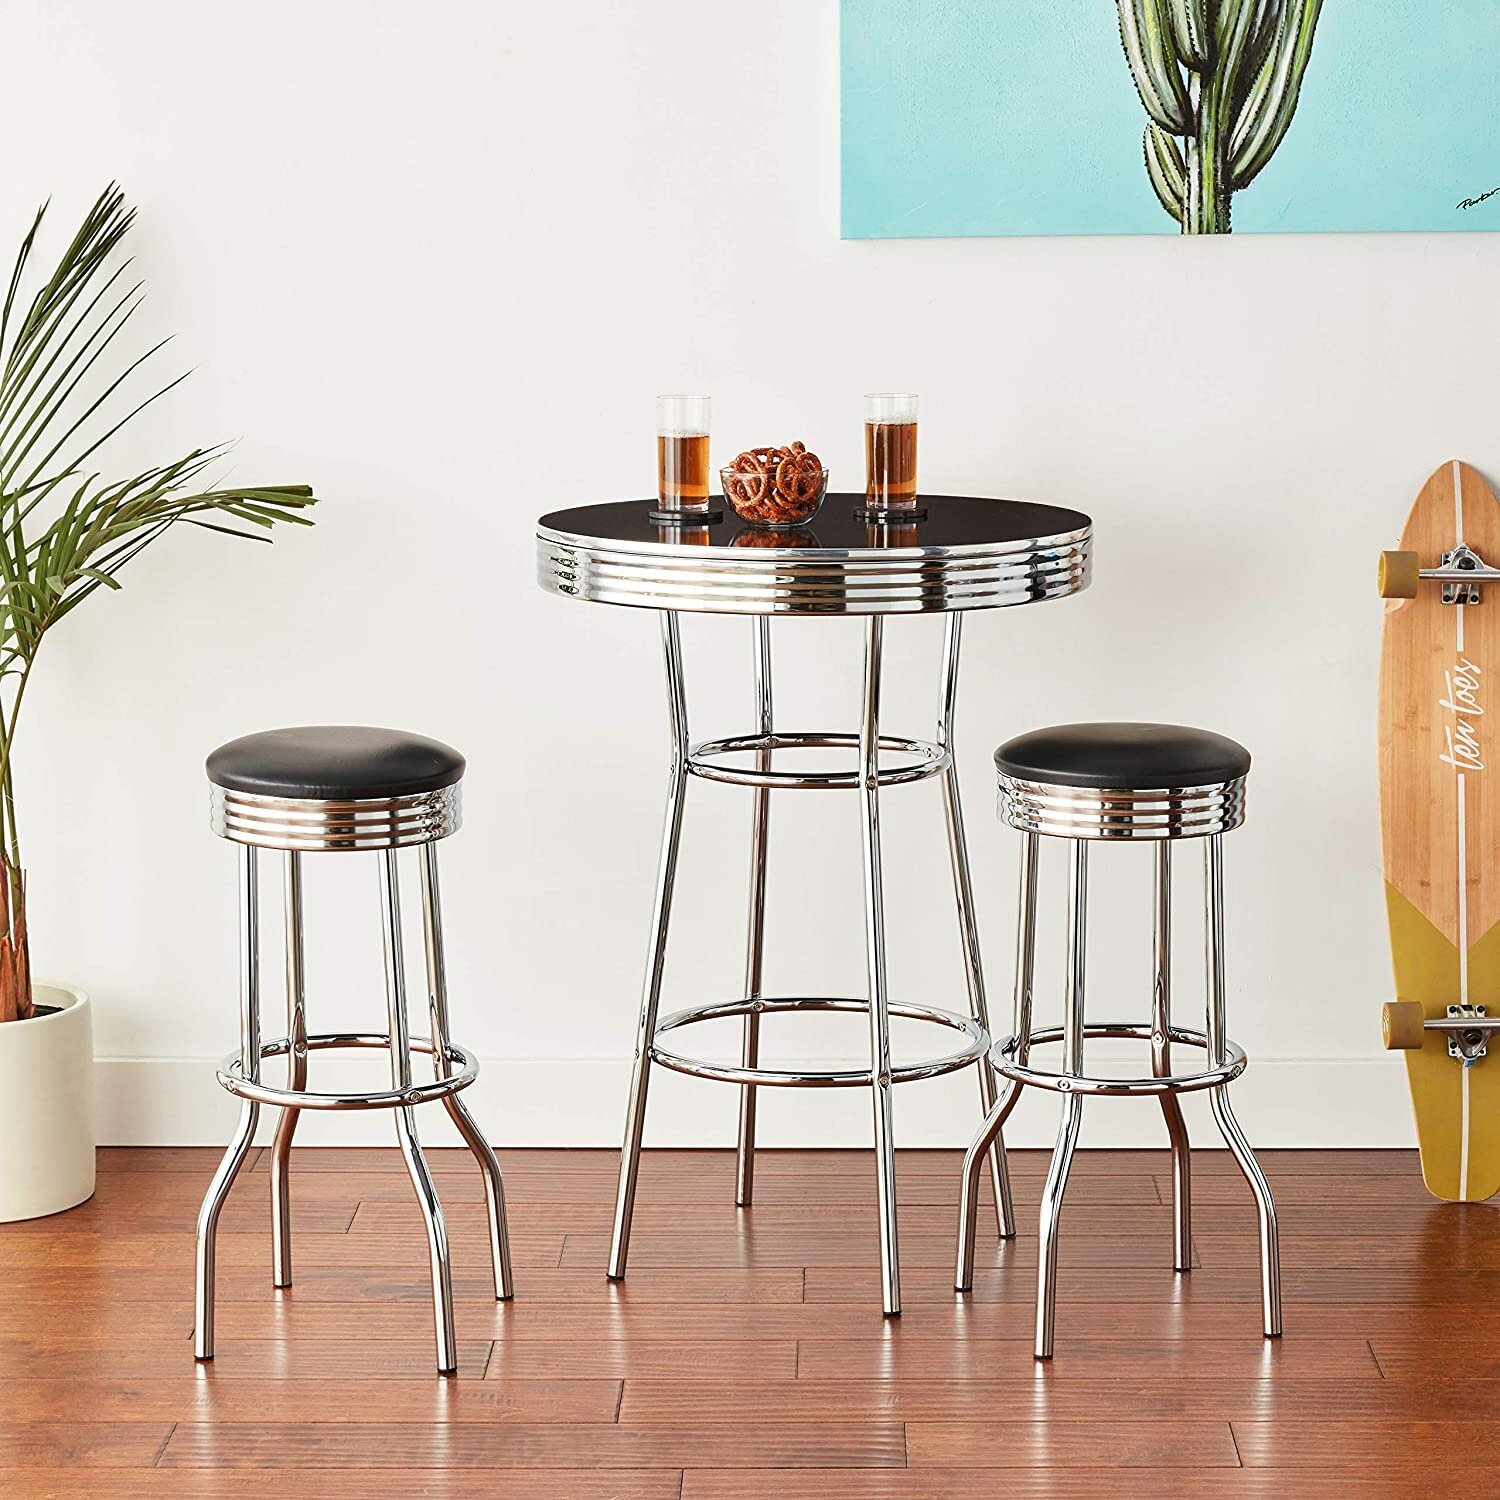 Retro Metal Diner styled Round Bar Height Table with Chairs